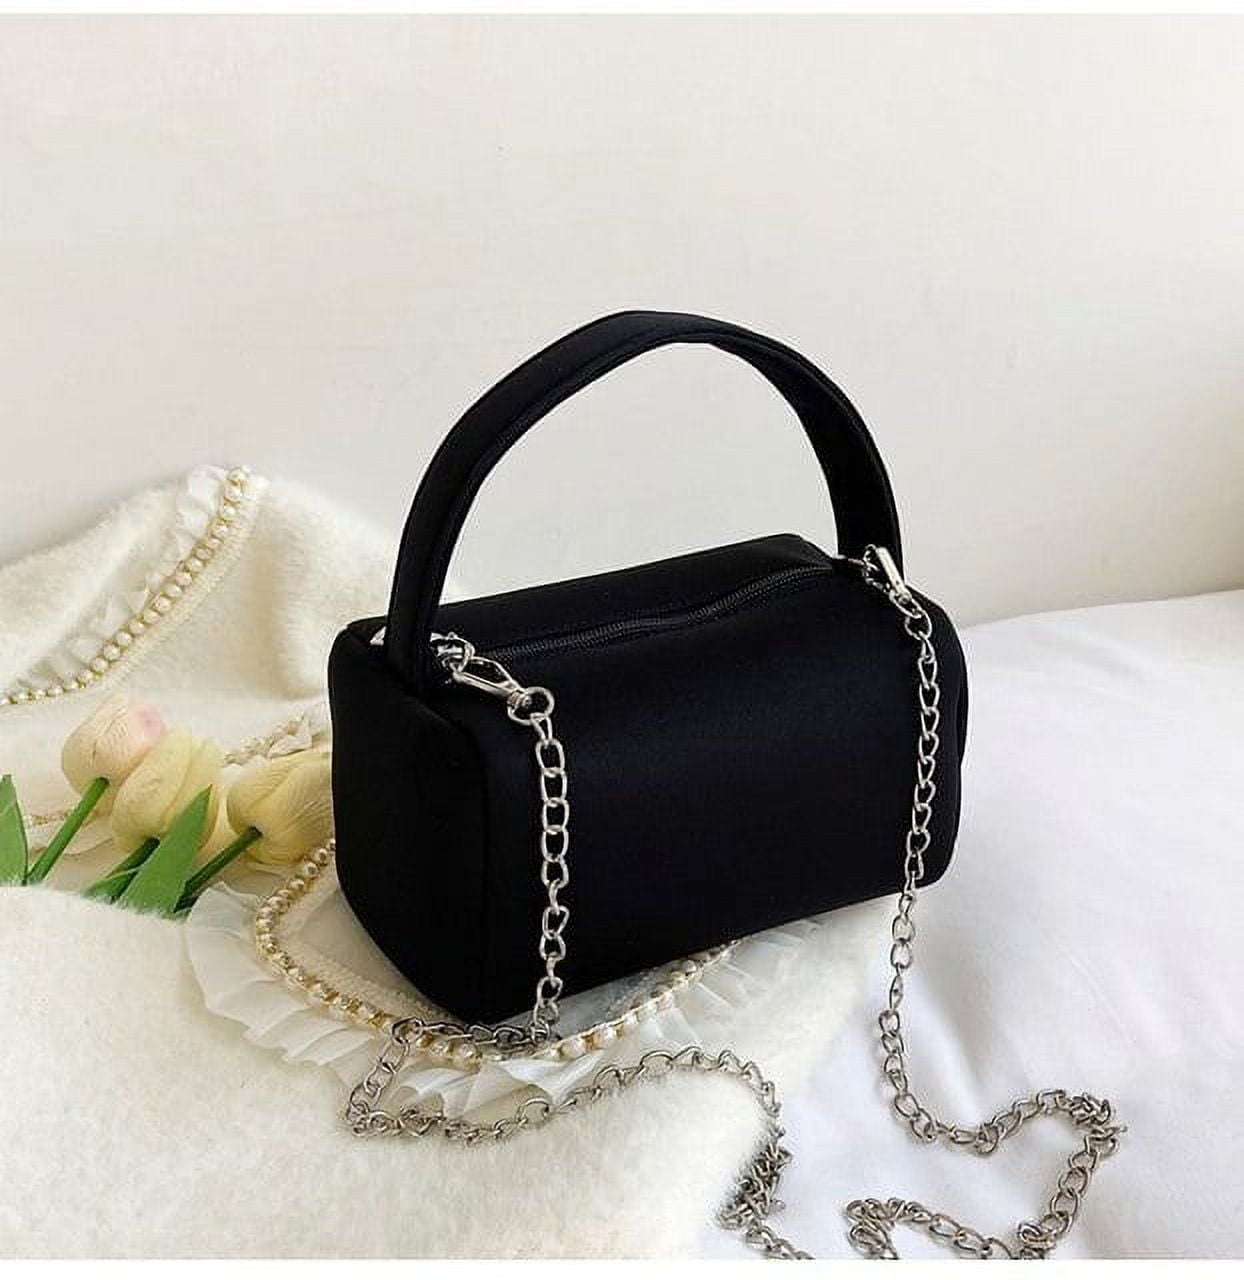 Summer PU Leather Evening Tote Bag For Women Casual, Small, Top Handle  Handbag With Pure Color Shoulder And Underarm Long Strap Shoulder Bag From  Dagongre, $11.85 | DHgate.Com